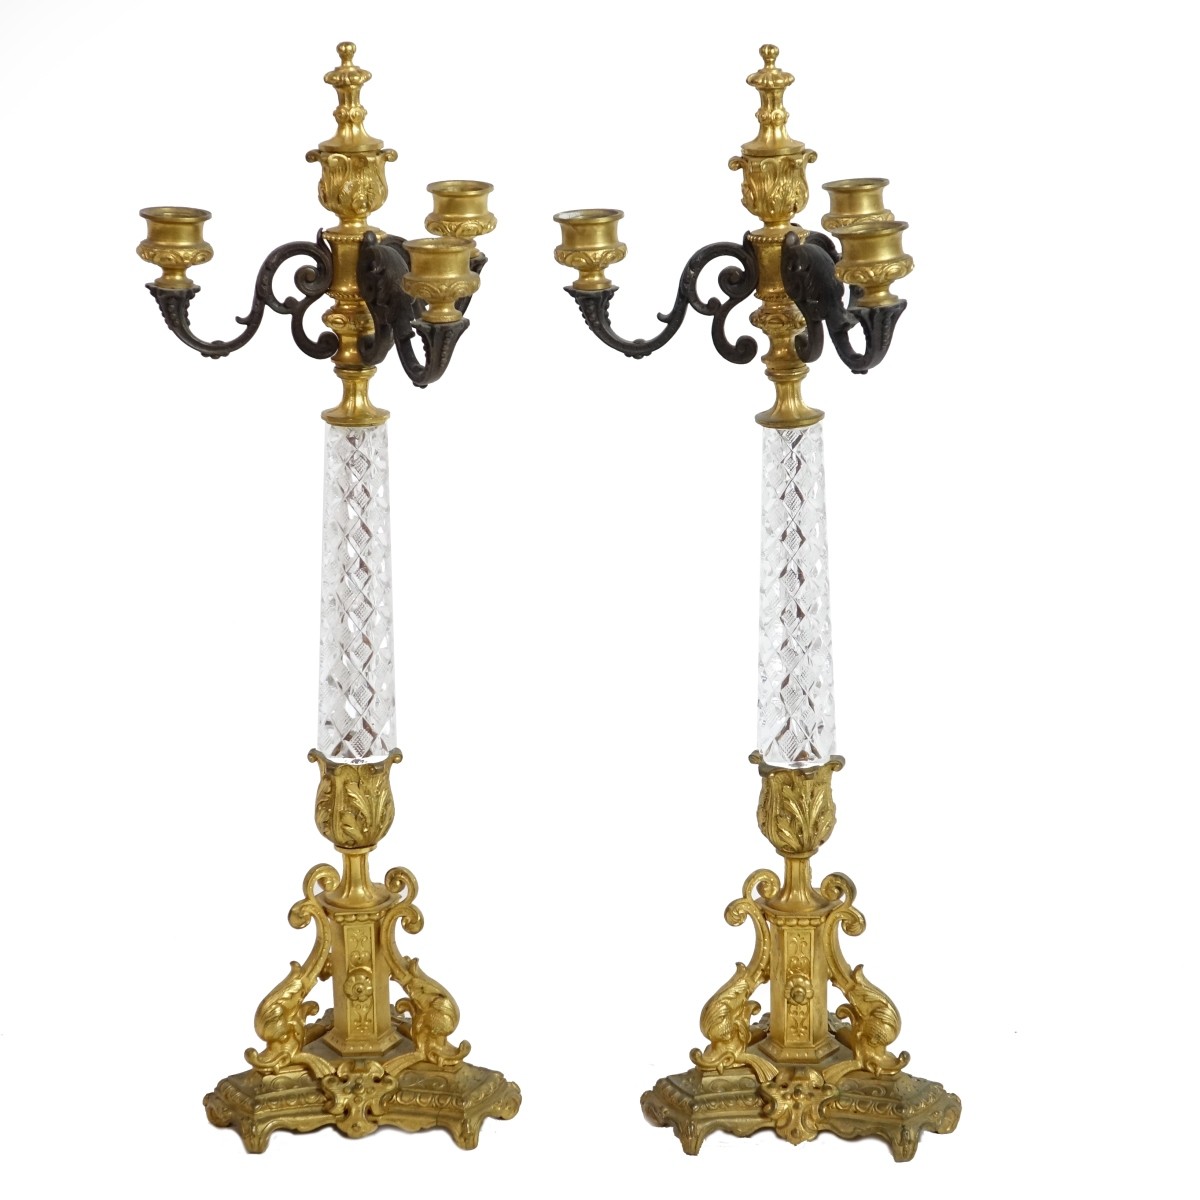 Pair of French Neoclassical Style Candelabra